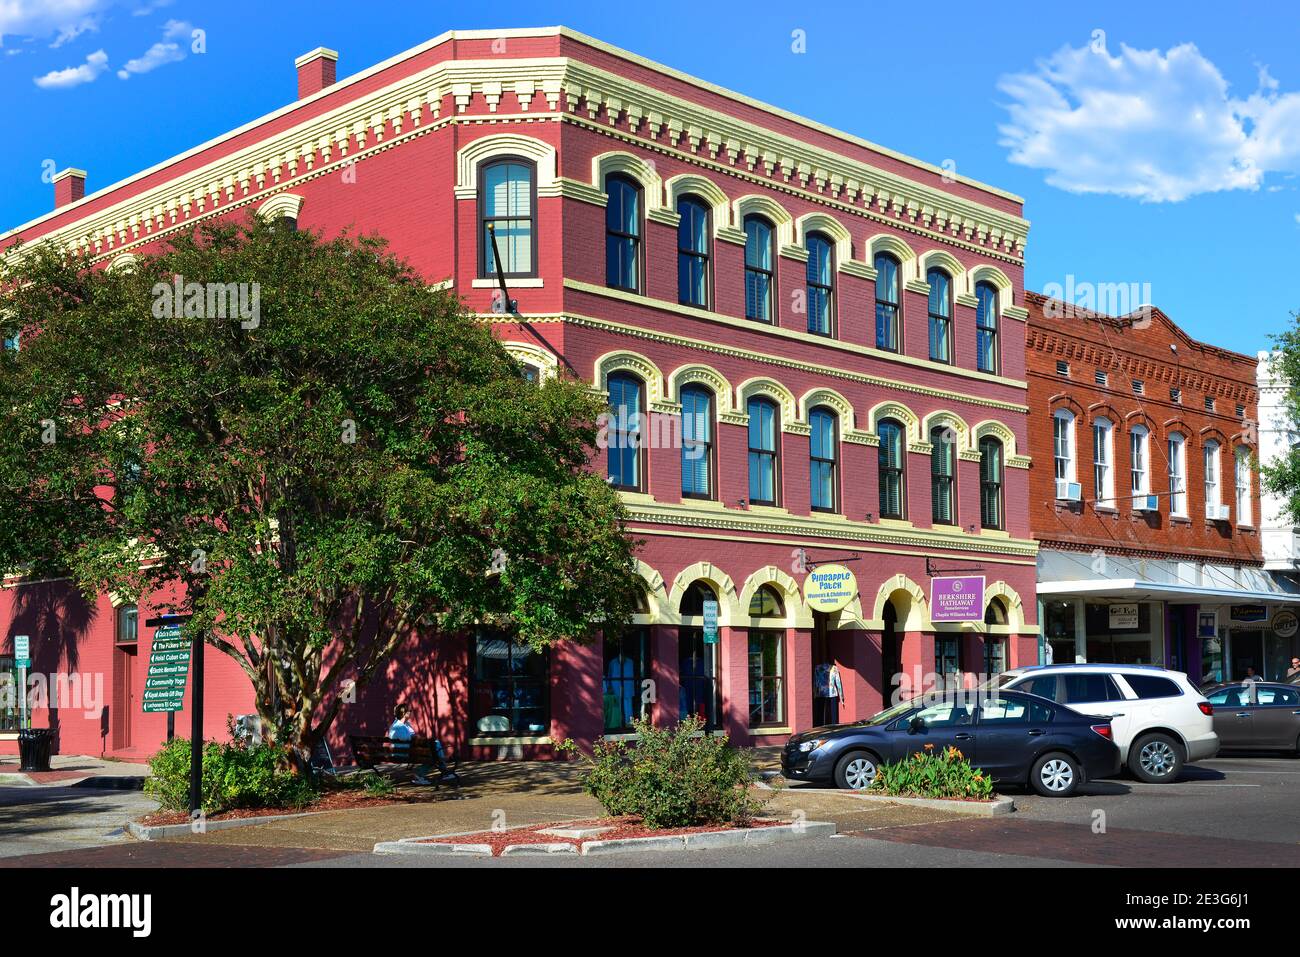 Architectural Gems now house Businesses and shops with storefronts in the historic downtown of Fernandina Beach on Amelia Island, FL Stock Photo